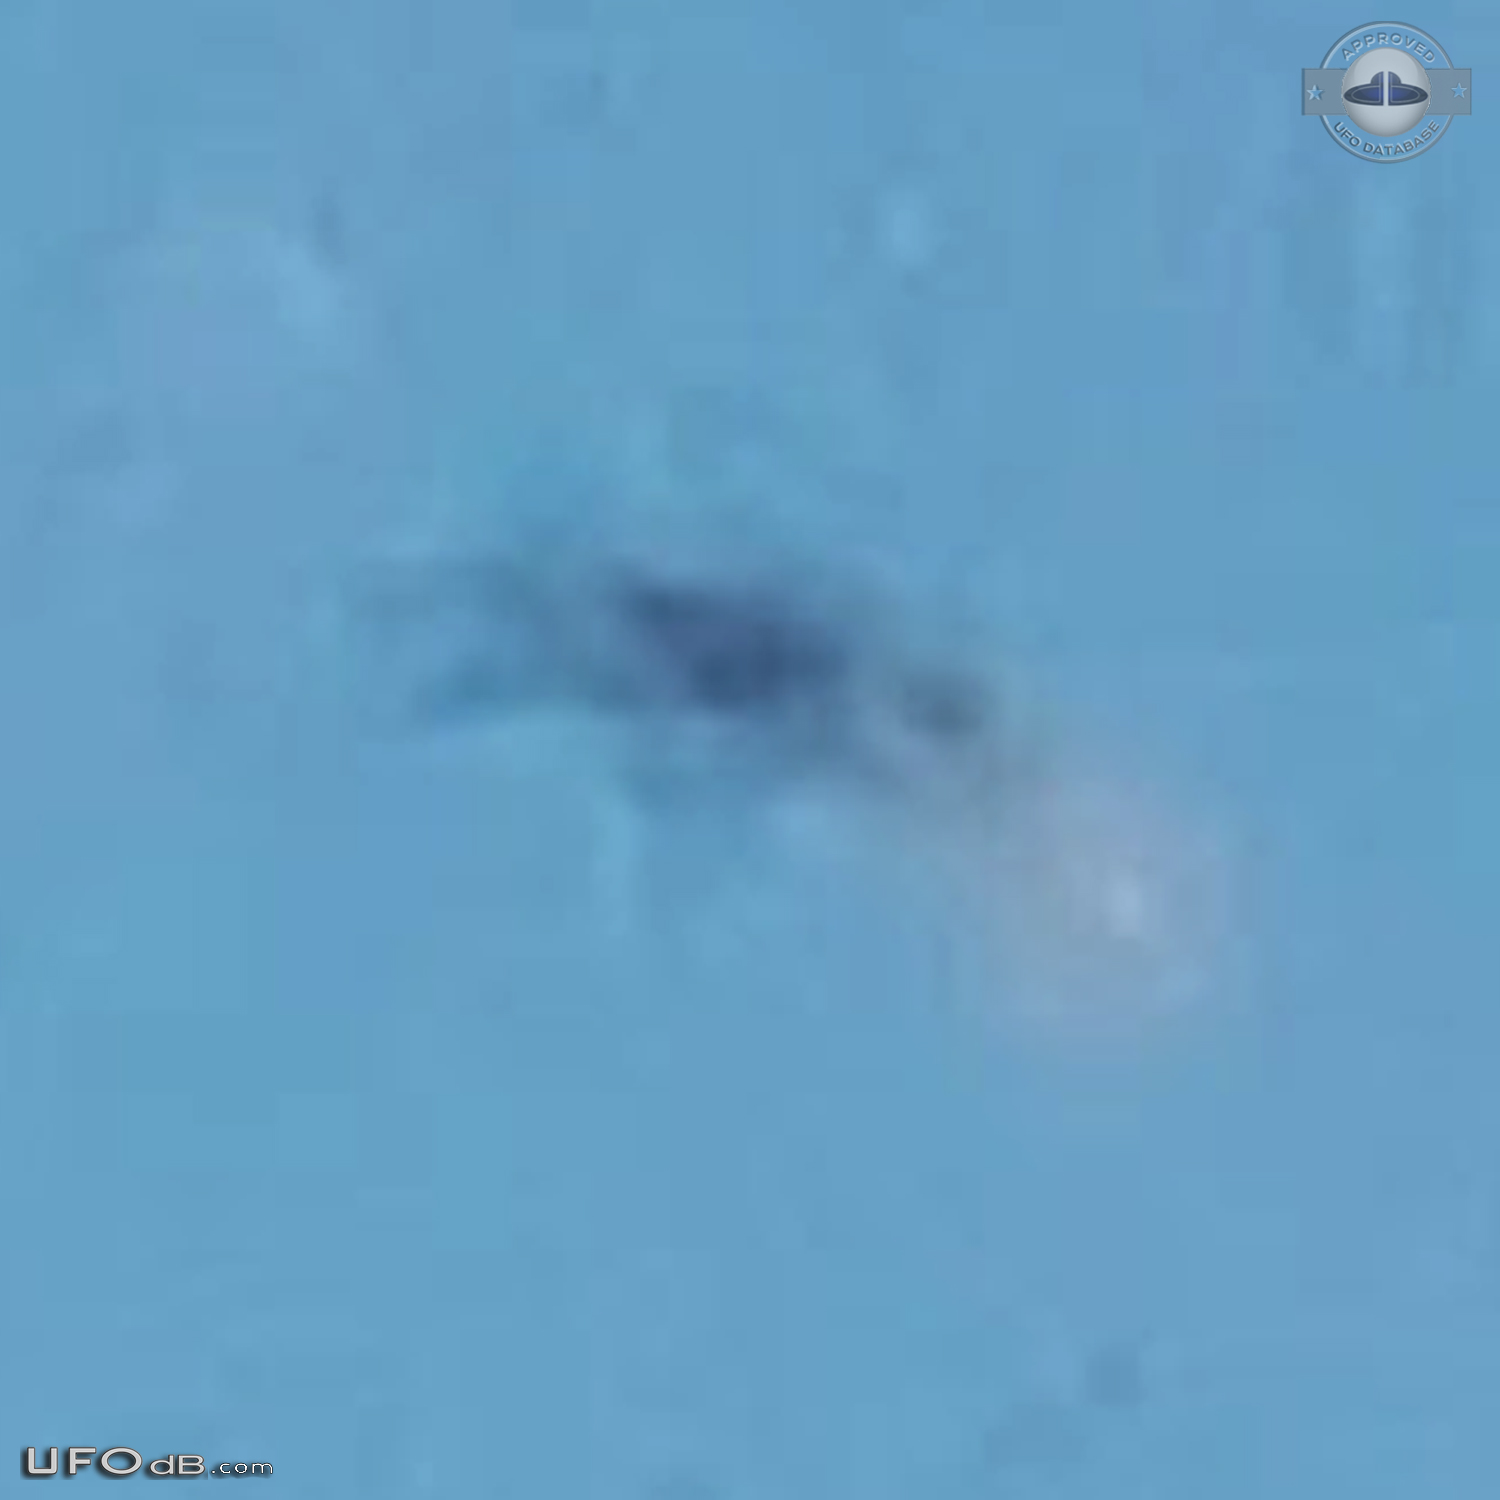 White trail with 45 angle - UFO going vertical - Derby England UK 2016 UFO Picture #777-4